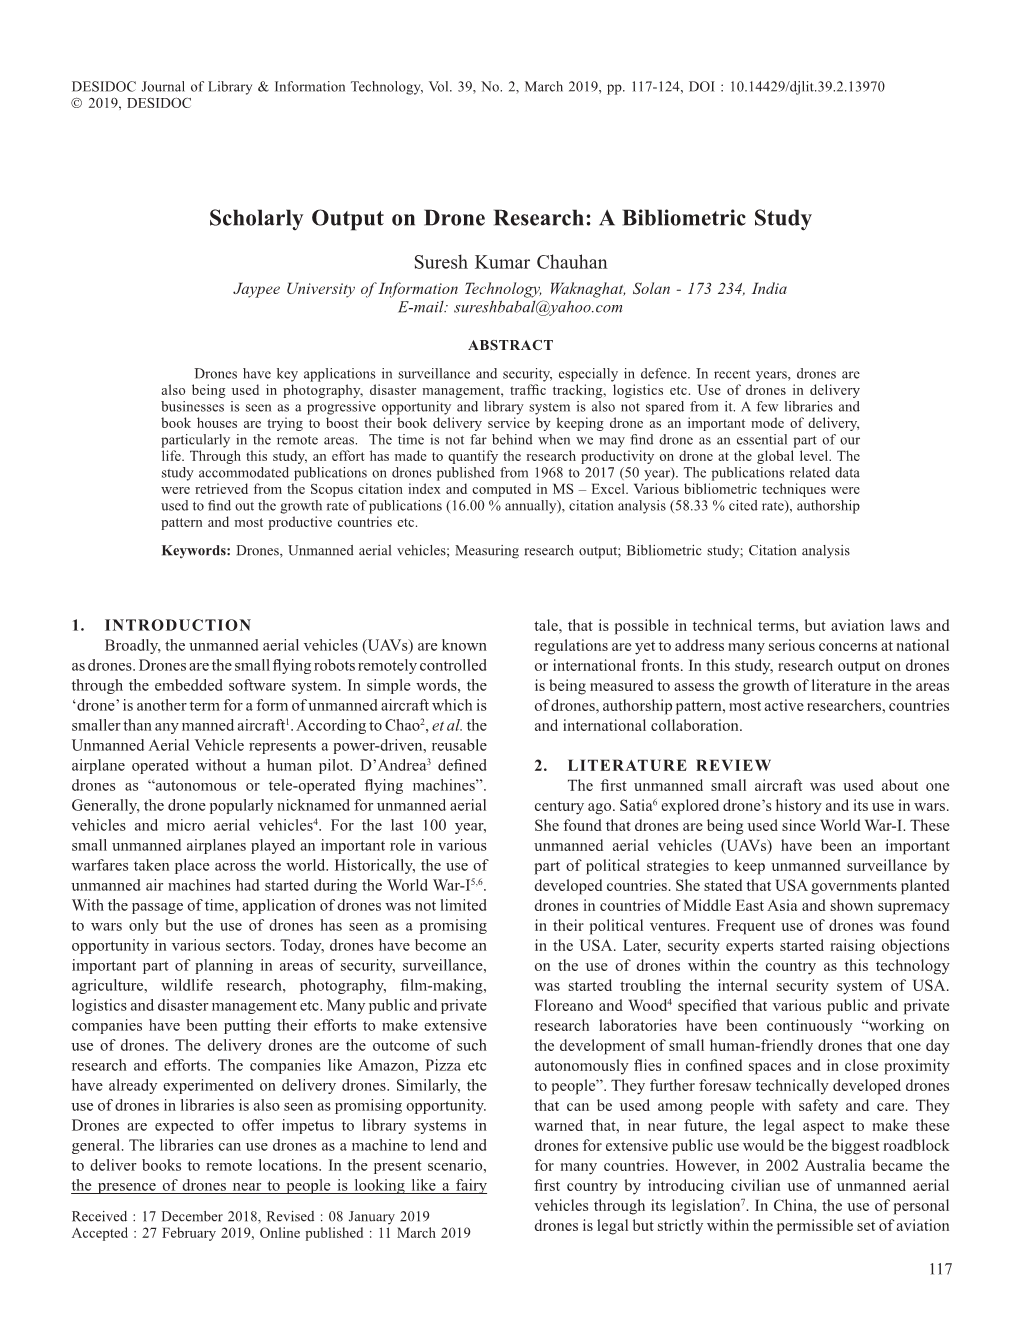 Scholarly Output on Drone Research: a Bibliometric Study